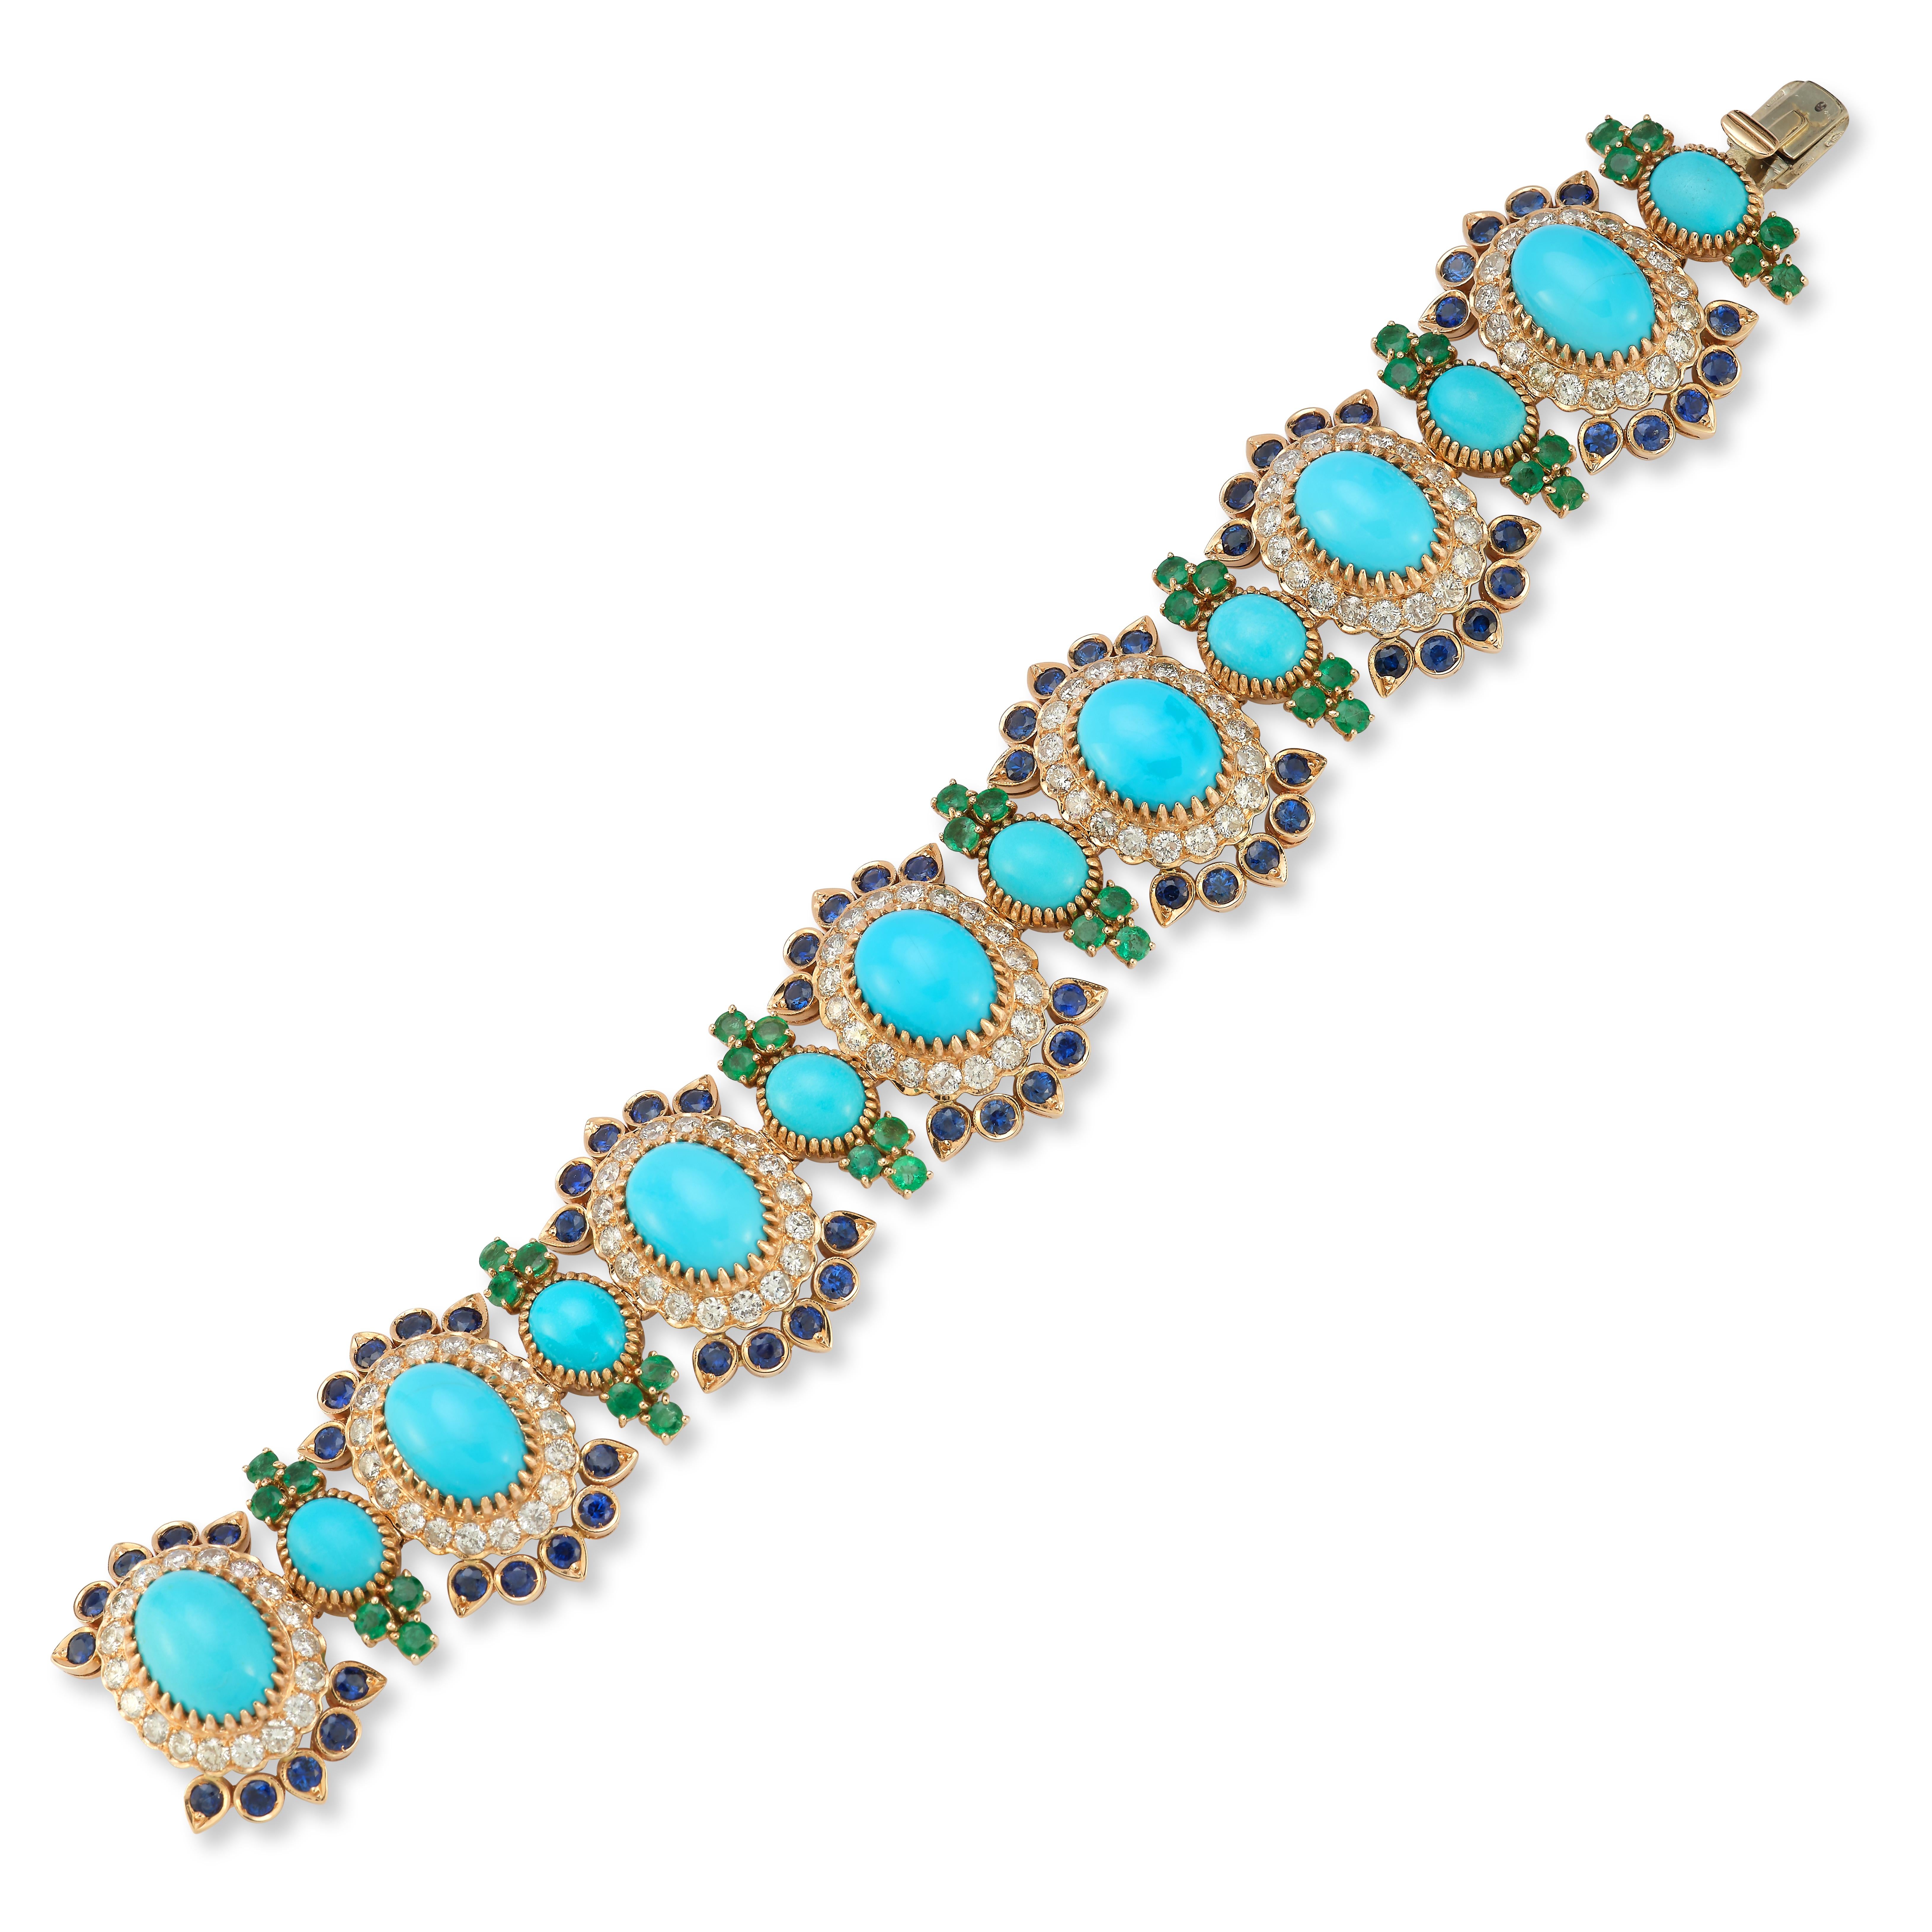 Turquoise Sapphire Emerald & Diamond Bracelet

A karat rose gold bracelet made of links set with a center cabochon turquoise framed by round cut diamonds and sapphires separated by smaller links set with a smaller cabochon turquoise and round cut